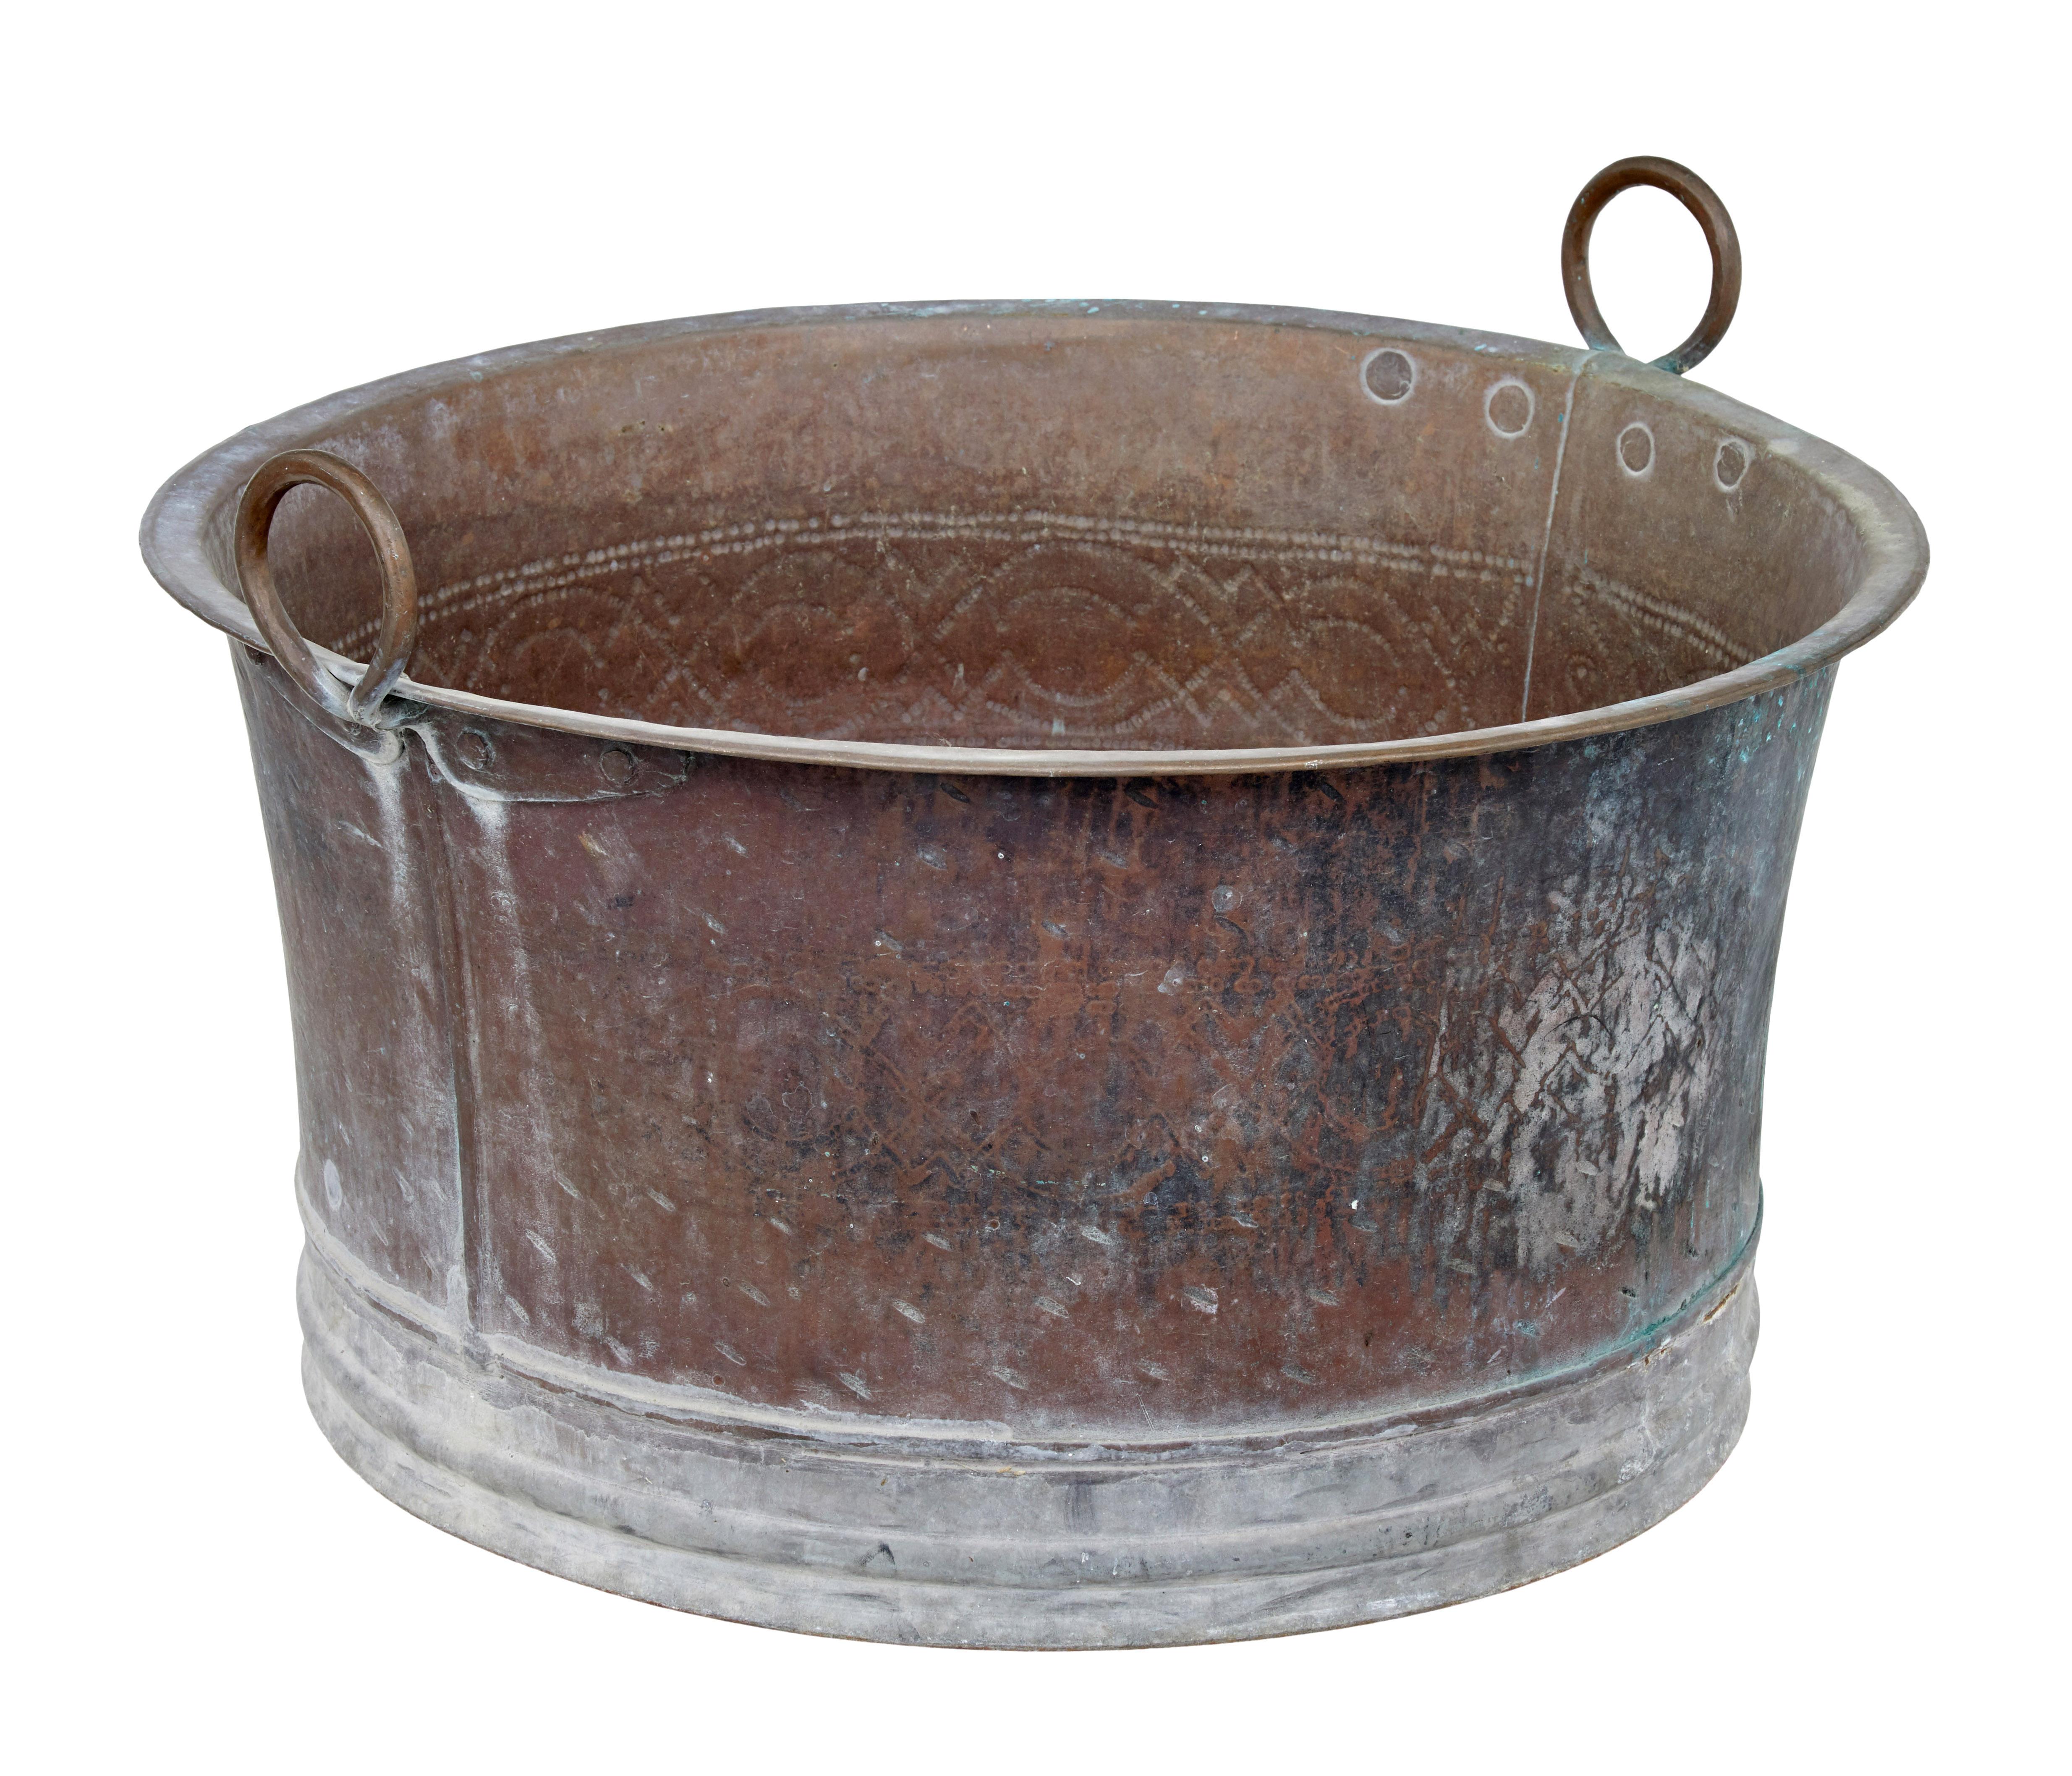 Large 19th century copper cooking vessel circa 1880.

We are pleased to offer this copper pot with its original patina that it has taken on over the years. Decorated around the outside with a hand hammered design.

Looped copper